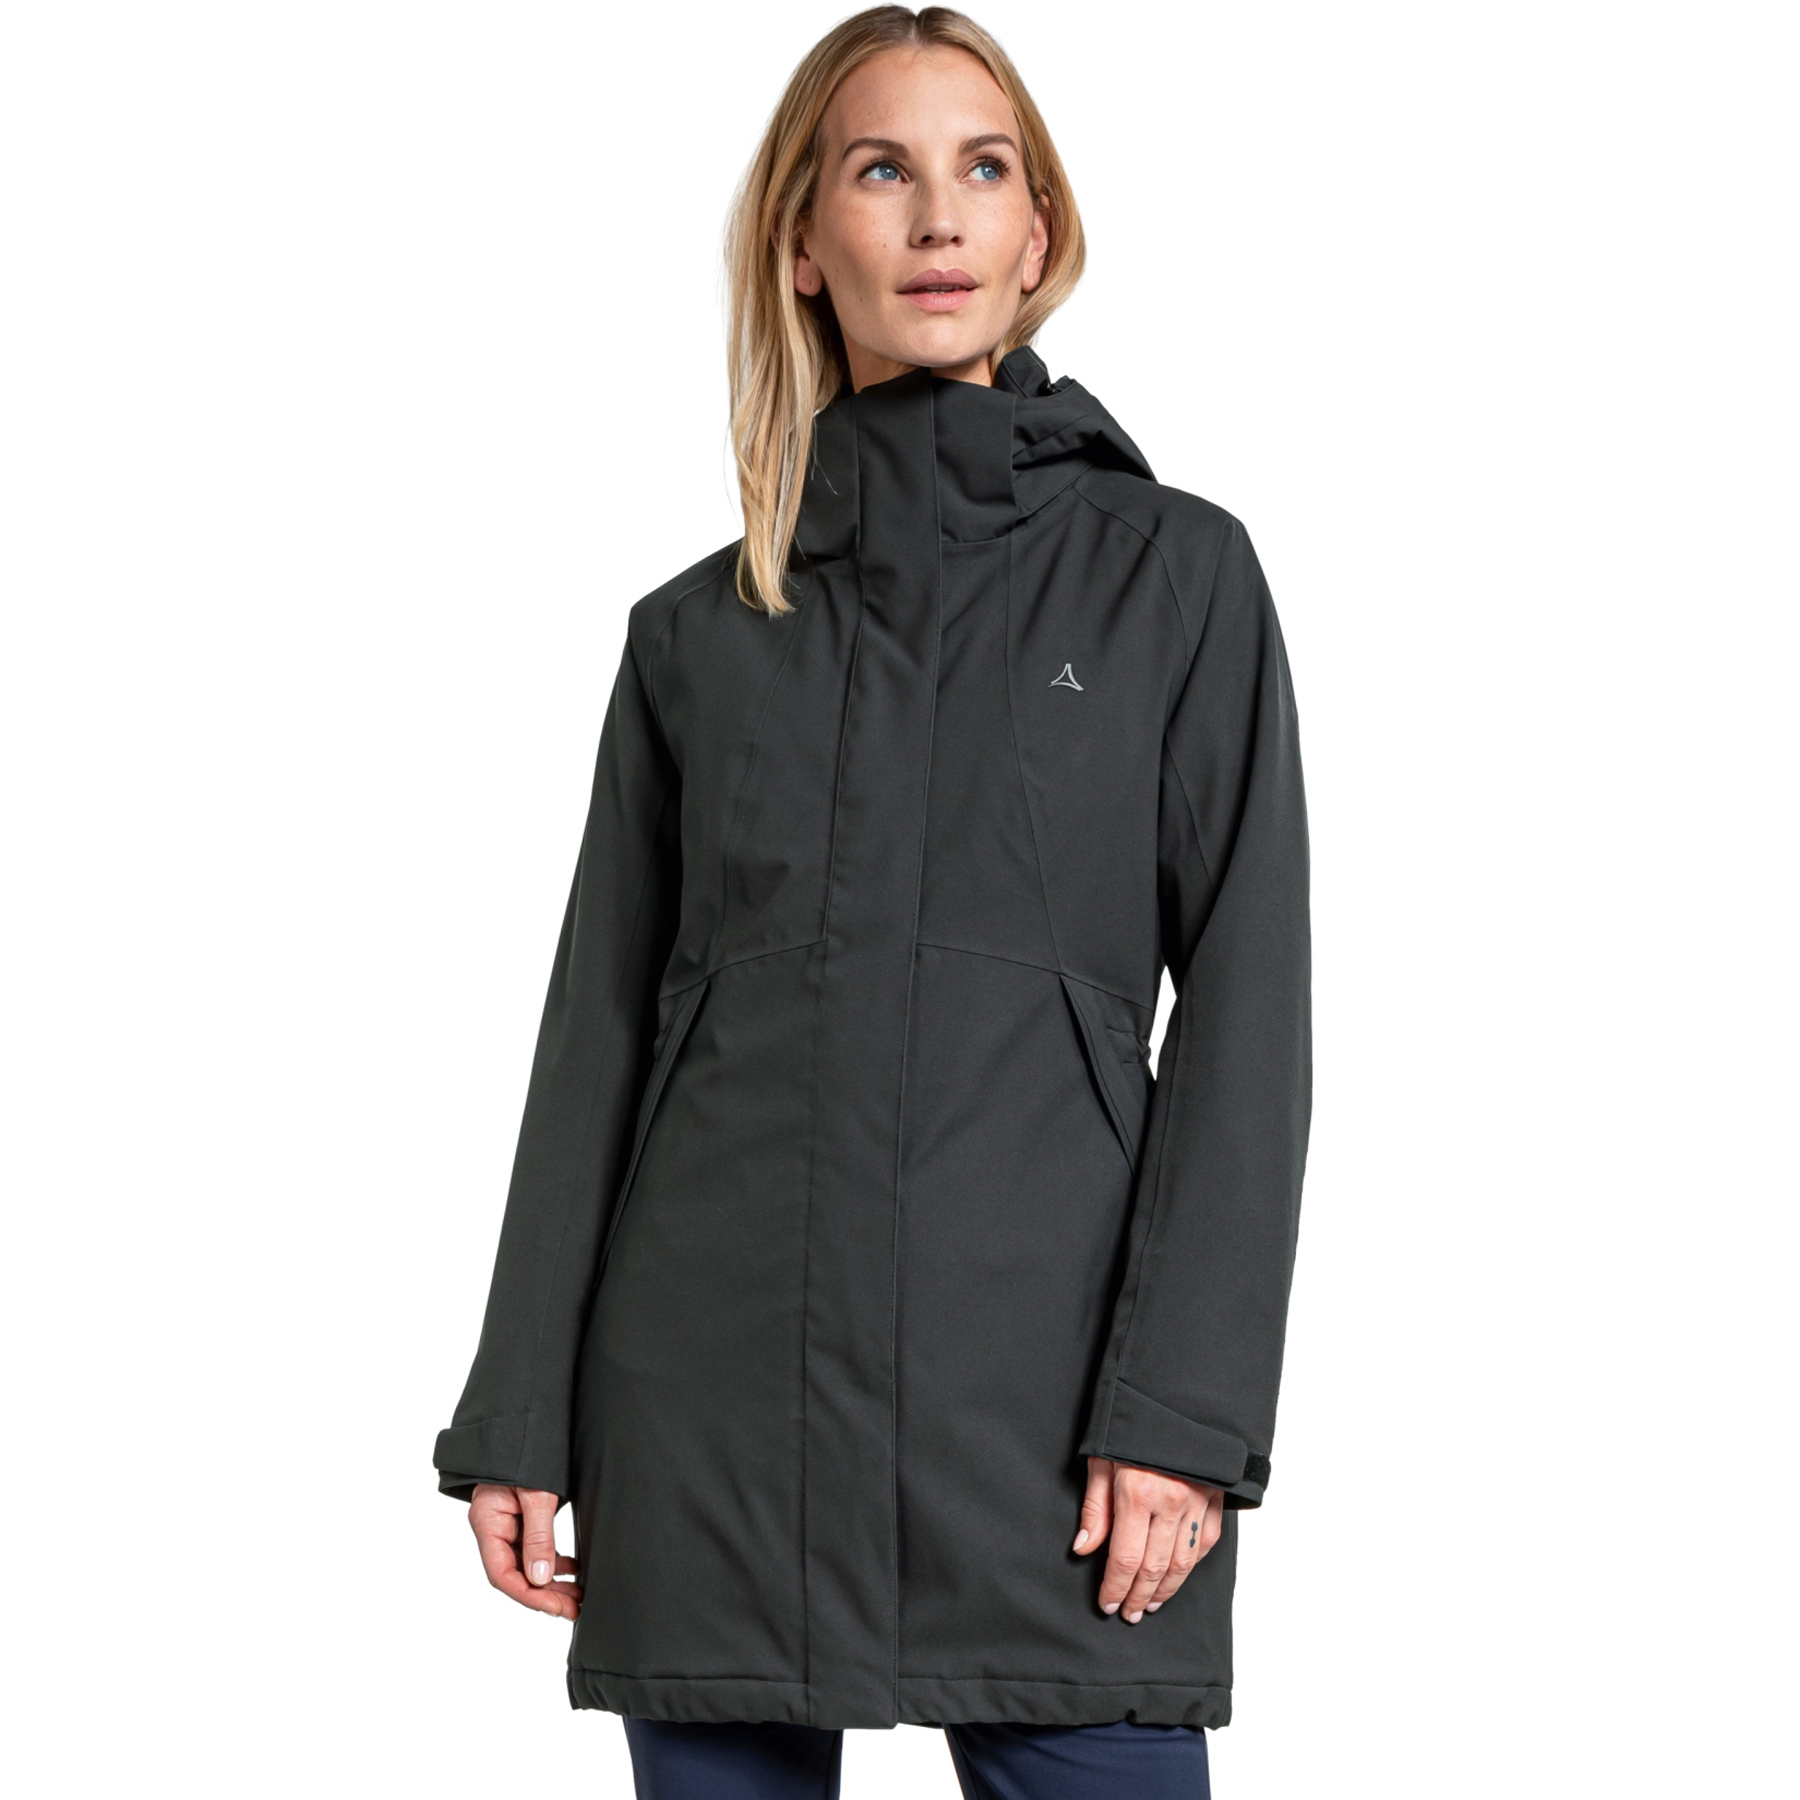 Picture of Schöffel Bastianisee Insulated Jacket Women - black 9990